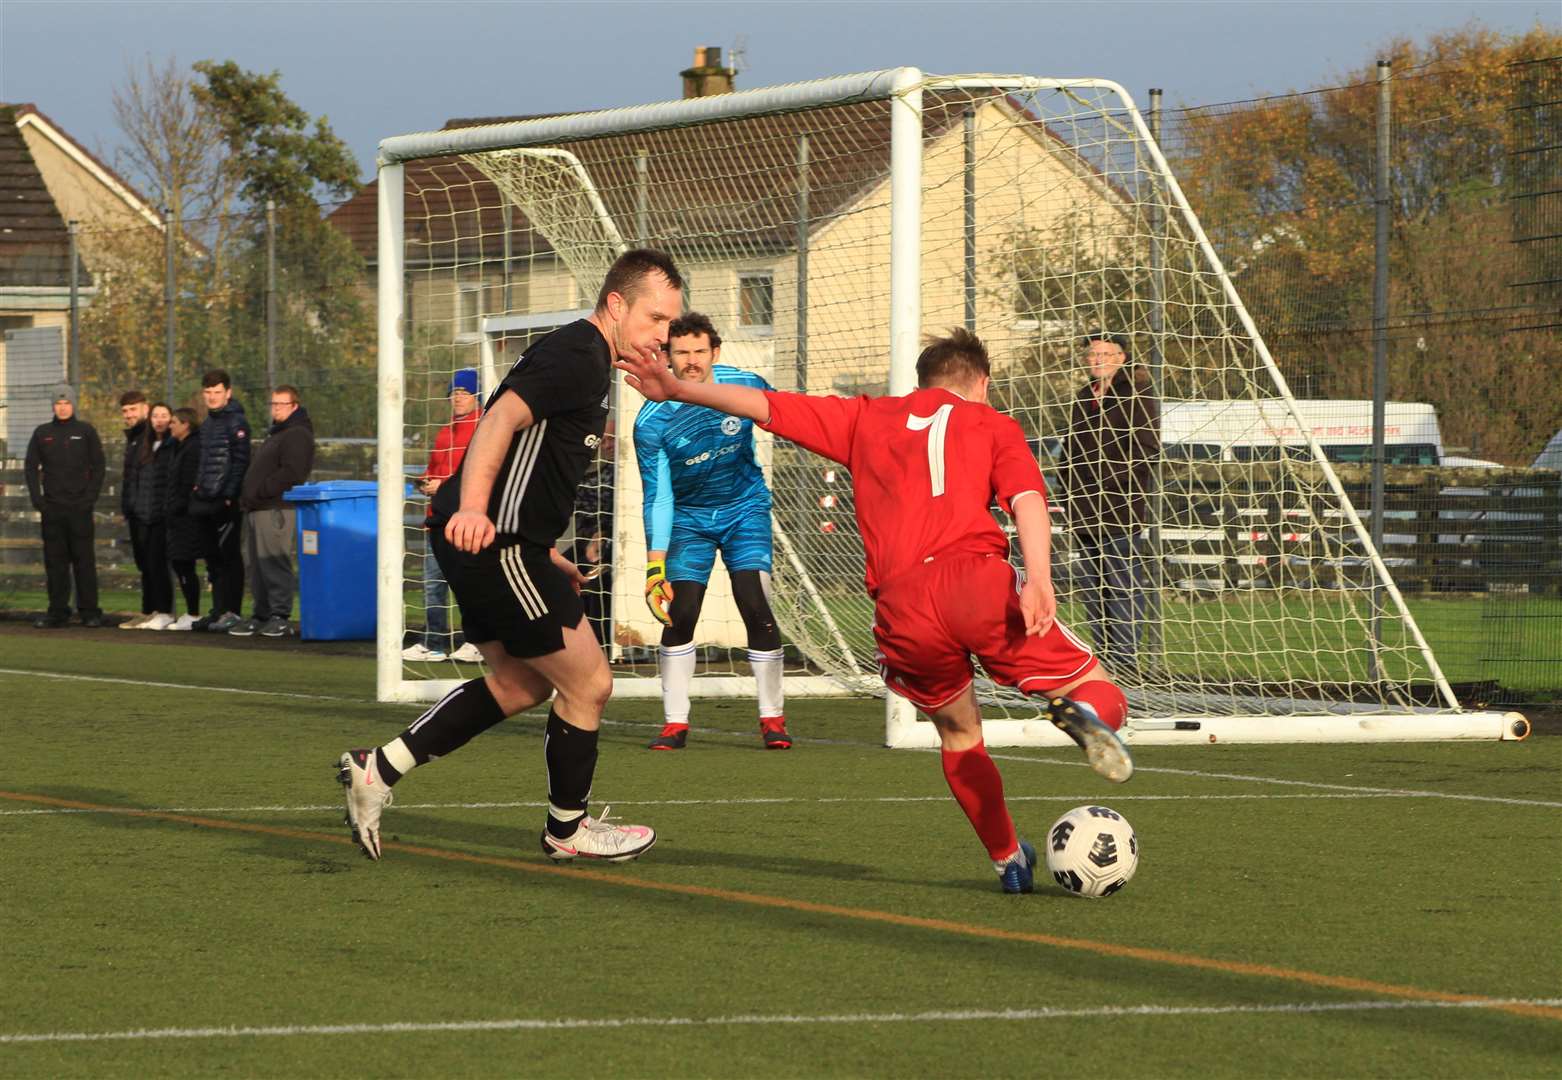 Cameron Montgomery of Thurso is trying to find a way past the Invergordon defense in the clubs' final game in October.  Invergordon won 2-1 that day after scoring two late goals.  Photo: Alan Hendry